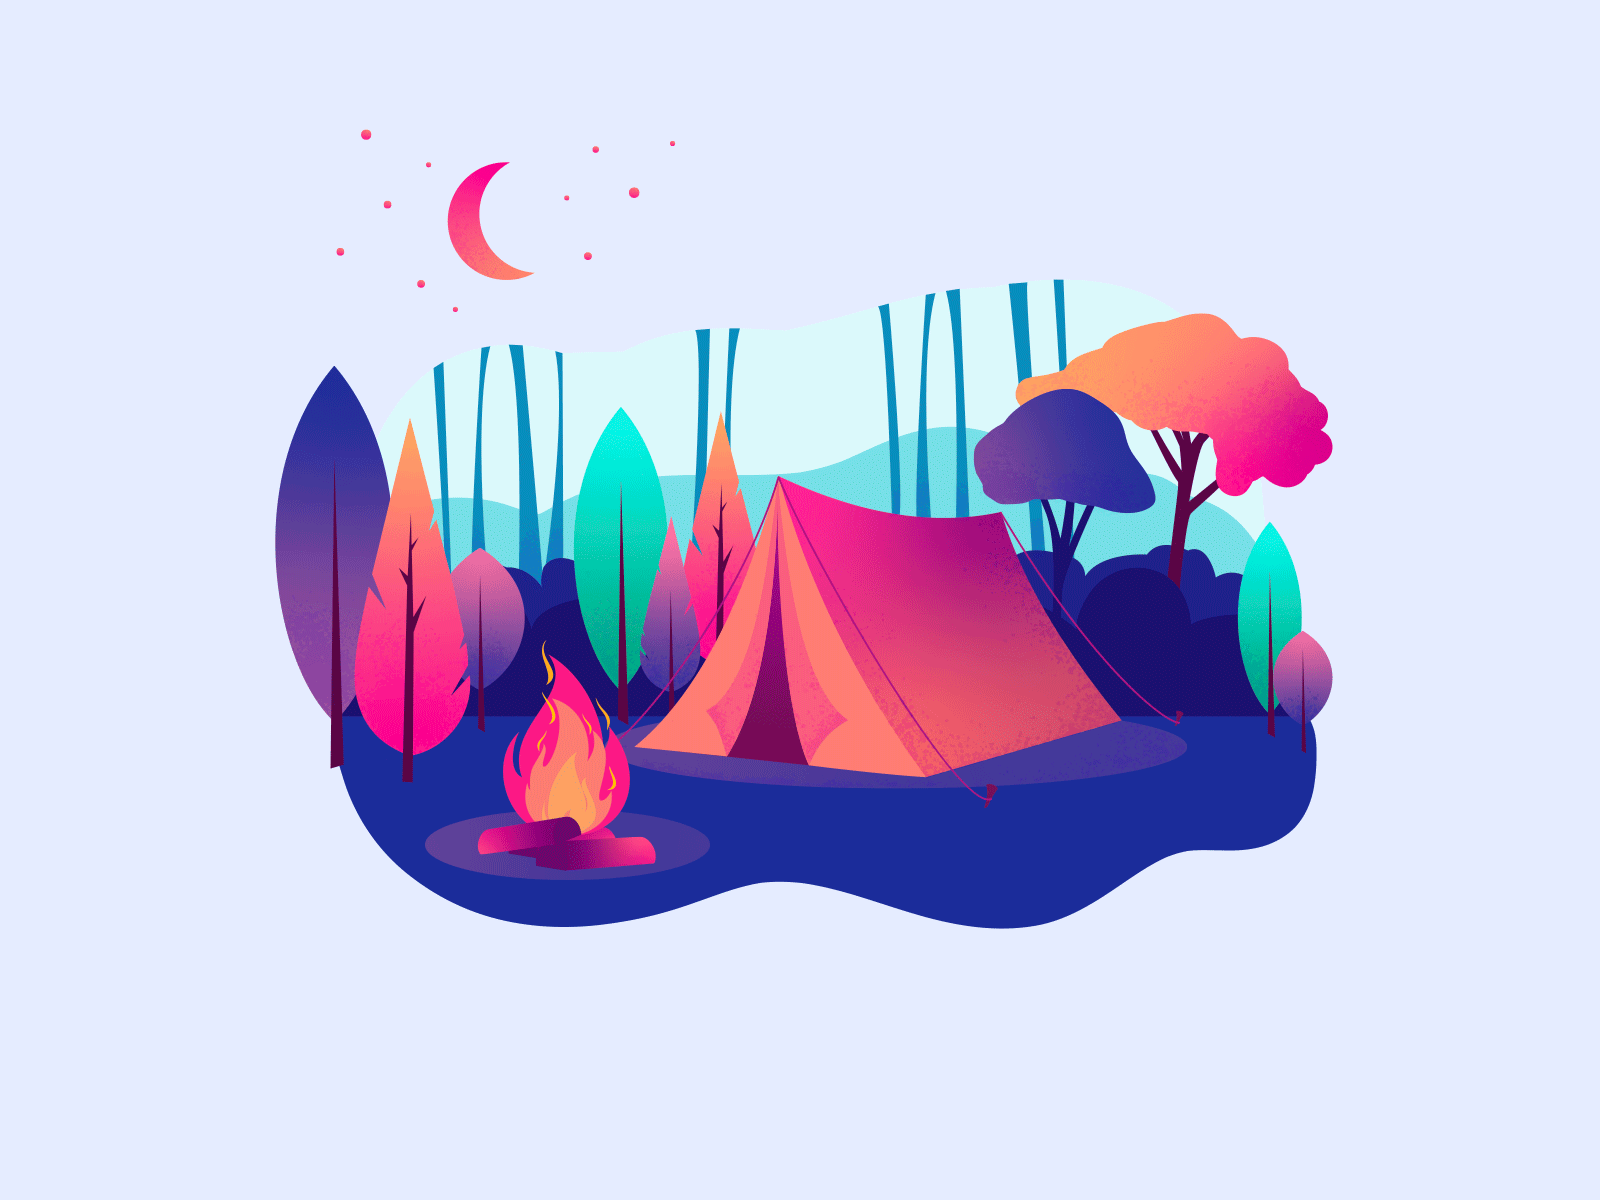 Campfire Animation by Kaitlin Gallant on Dribbble